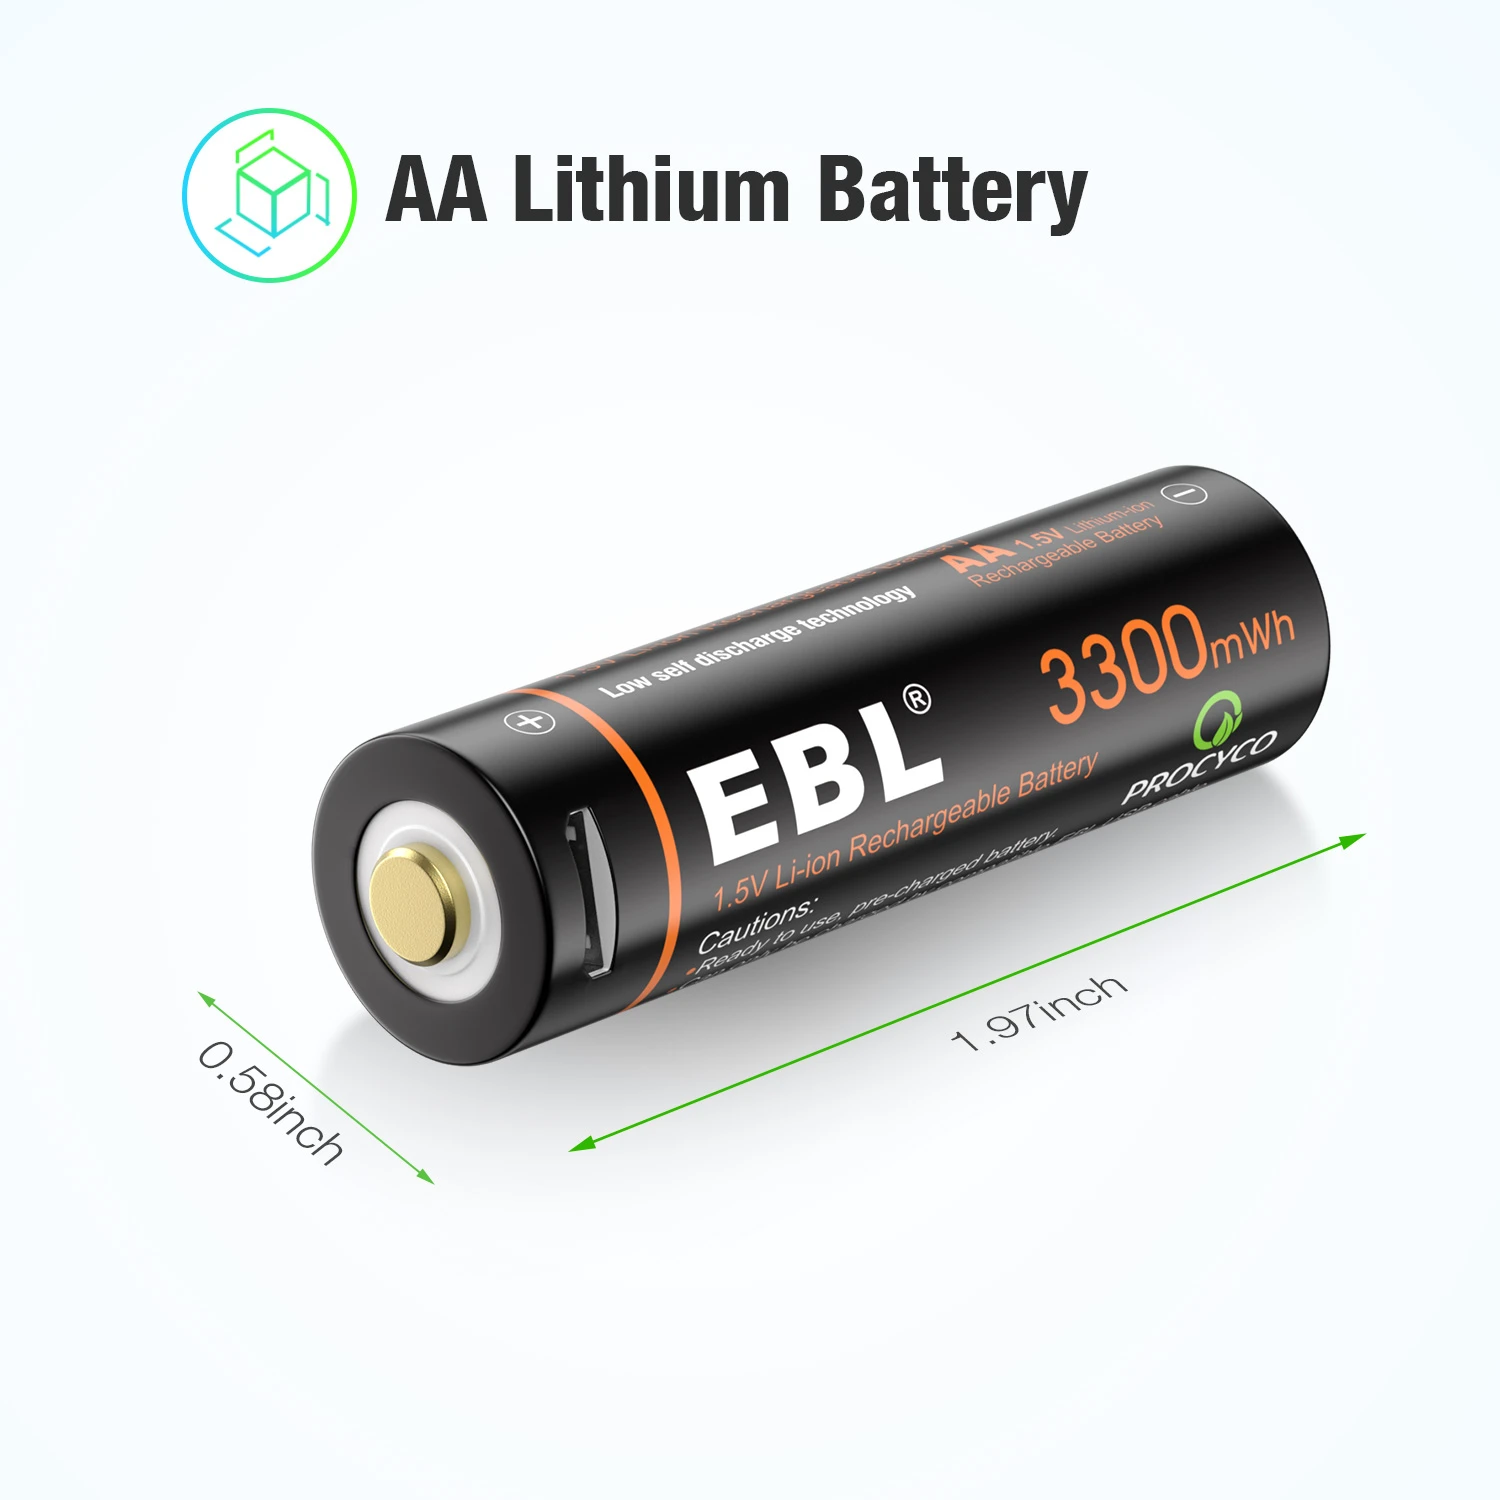 EBL Wholesale Original Rechargeable 18650 Lithium-Ion Battery With Micro Usb Input Cable 1600mAh 1.5 V AA